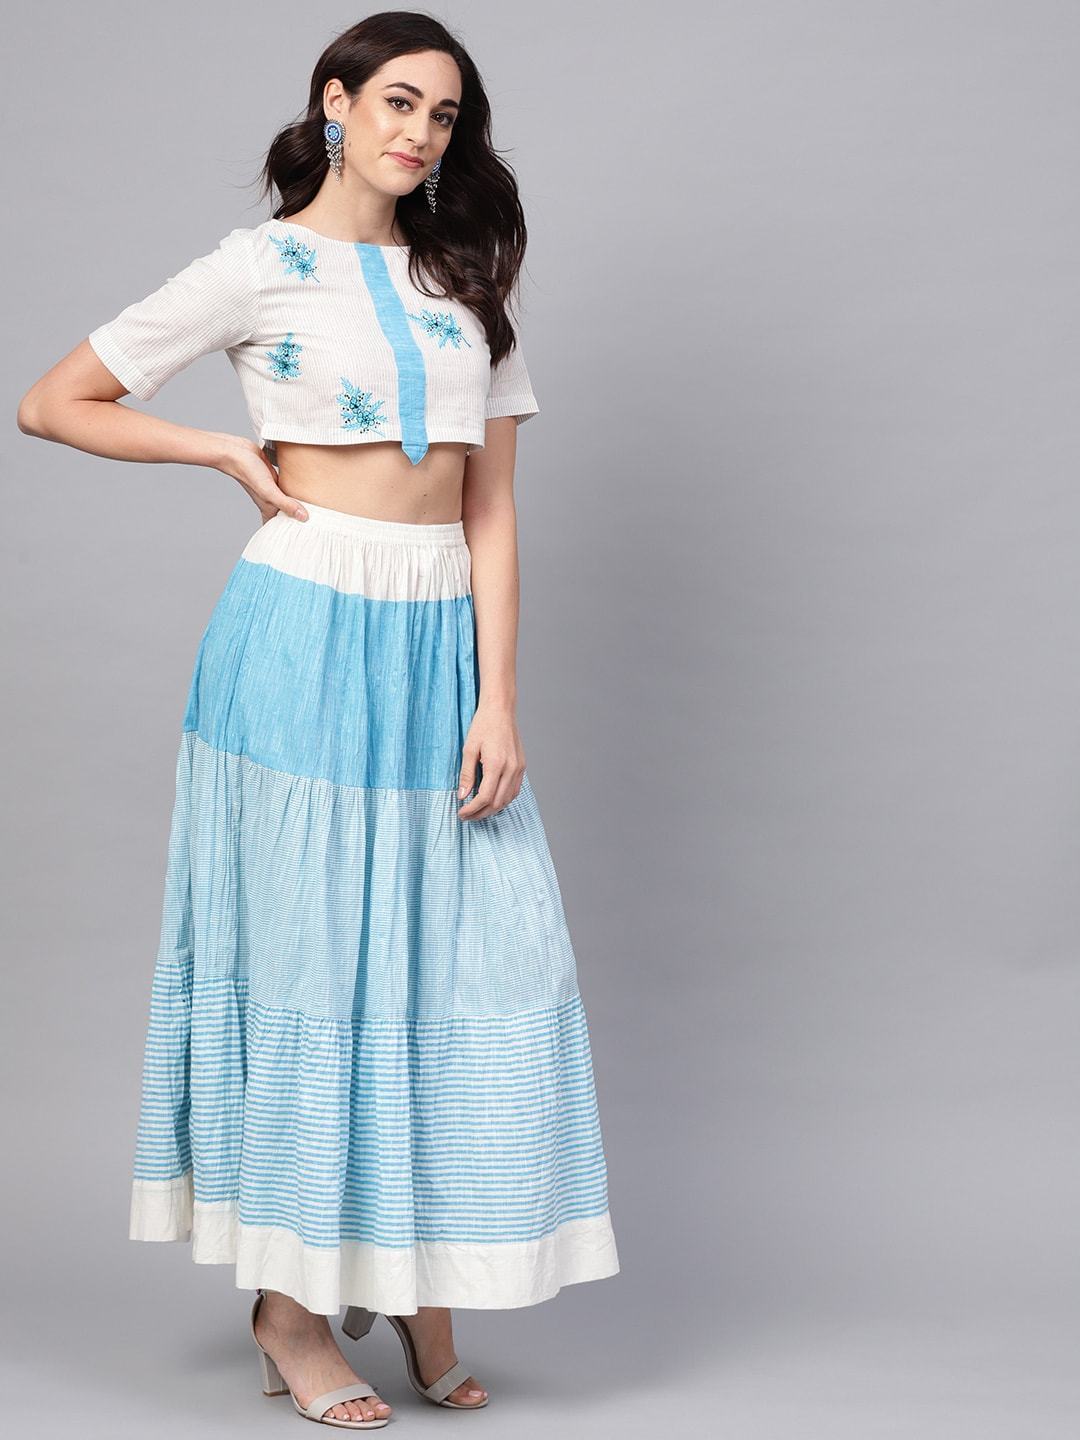 Women's Handloom Embroidered Top With Skirt - Pannkh